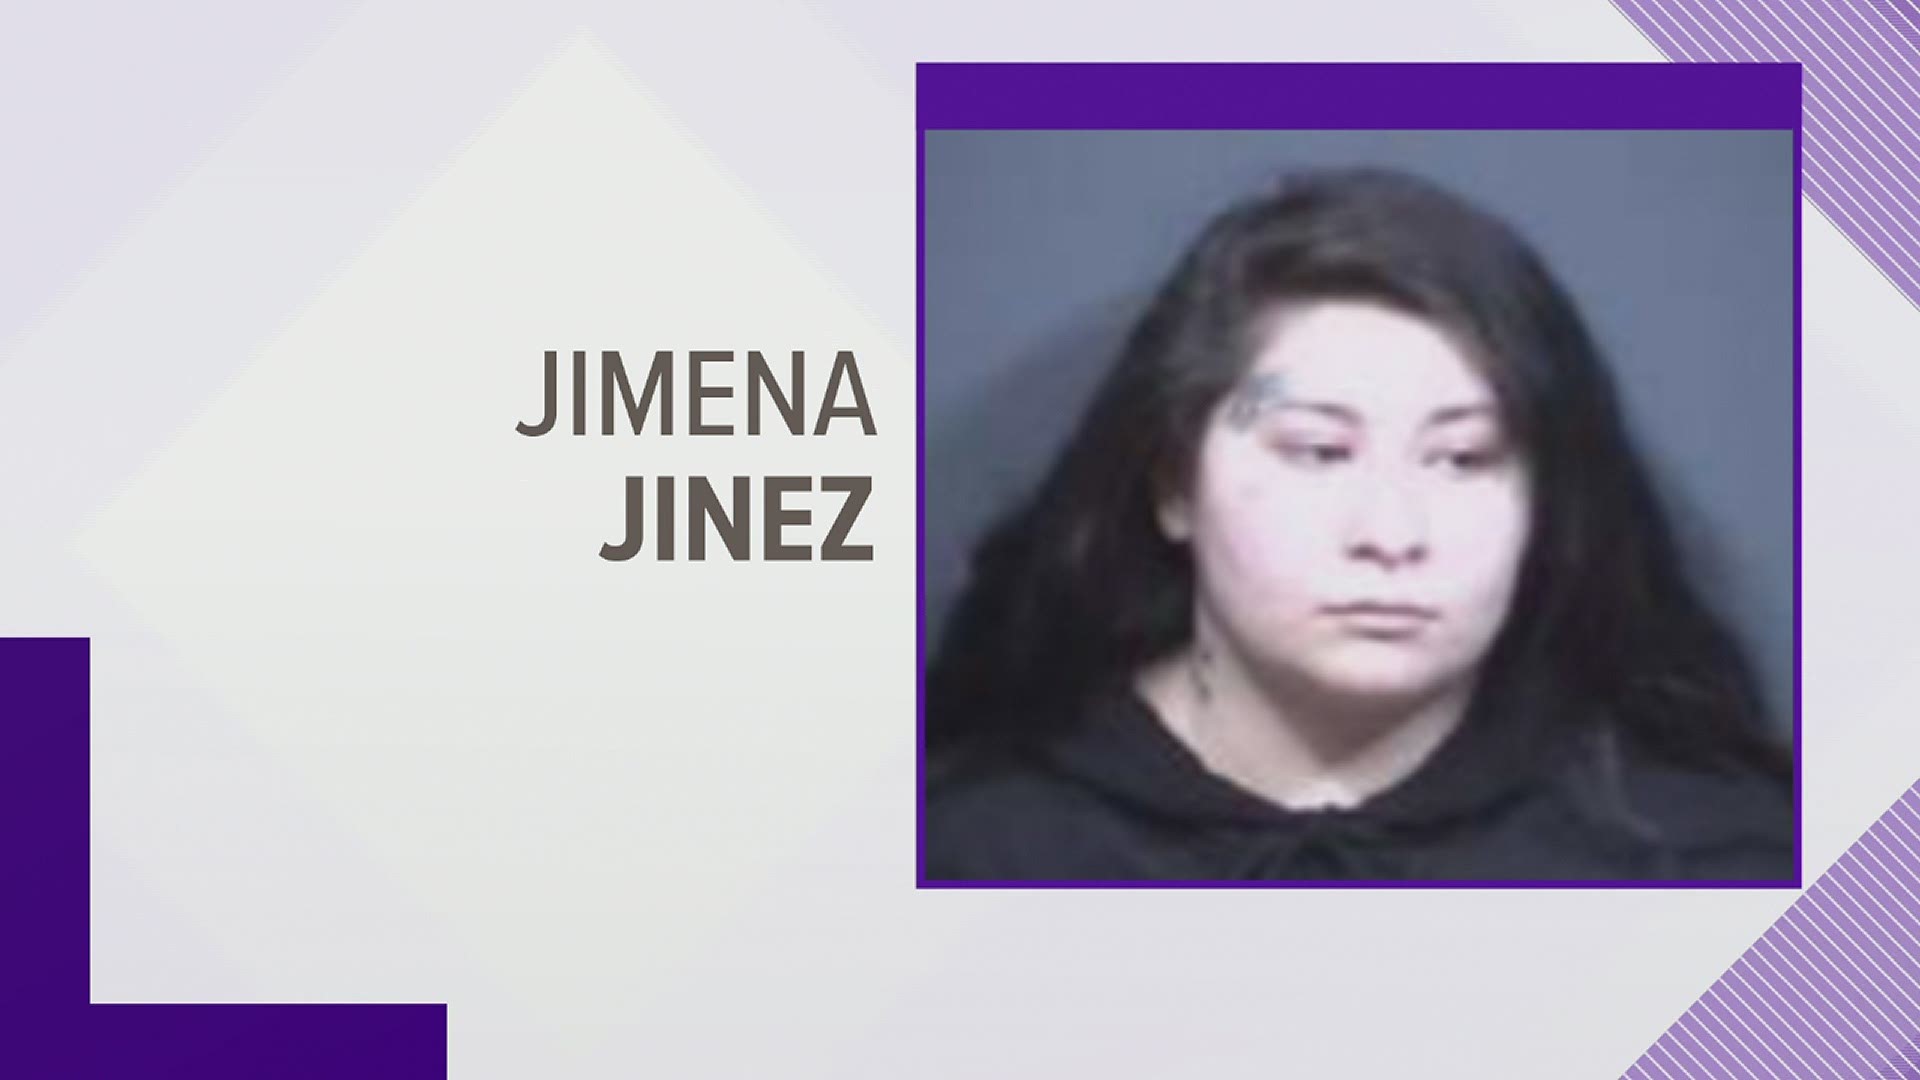 Police say a woman from Rock Island has been charged with first-degree murder in the death of a teenage girl.